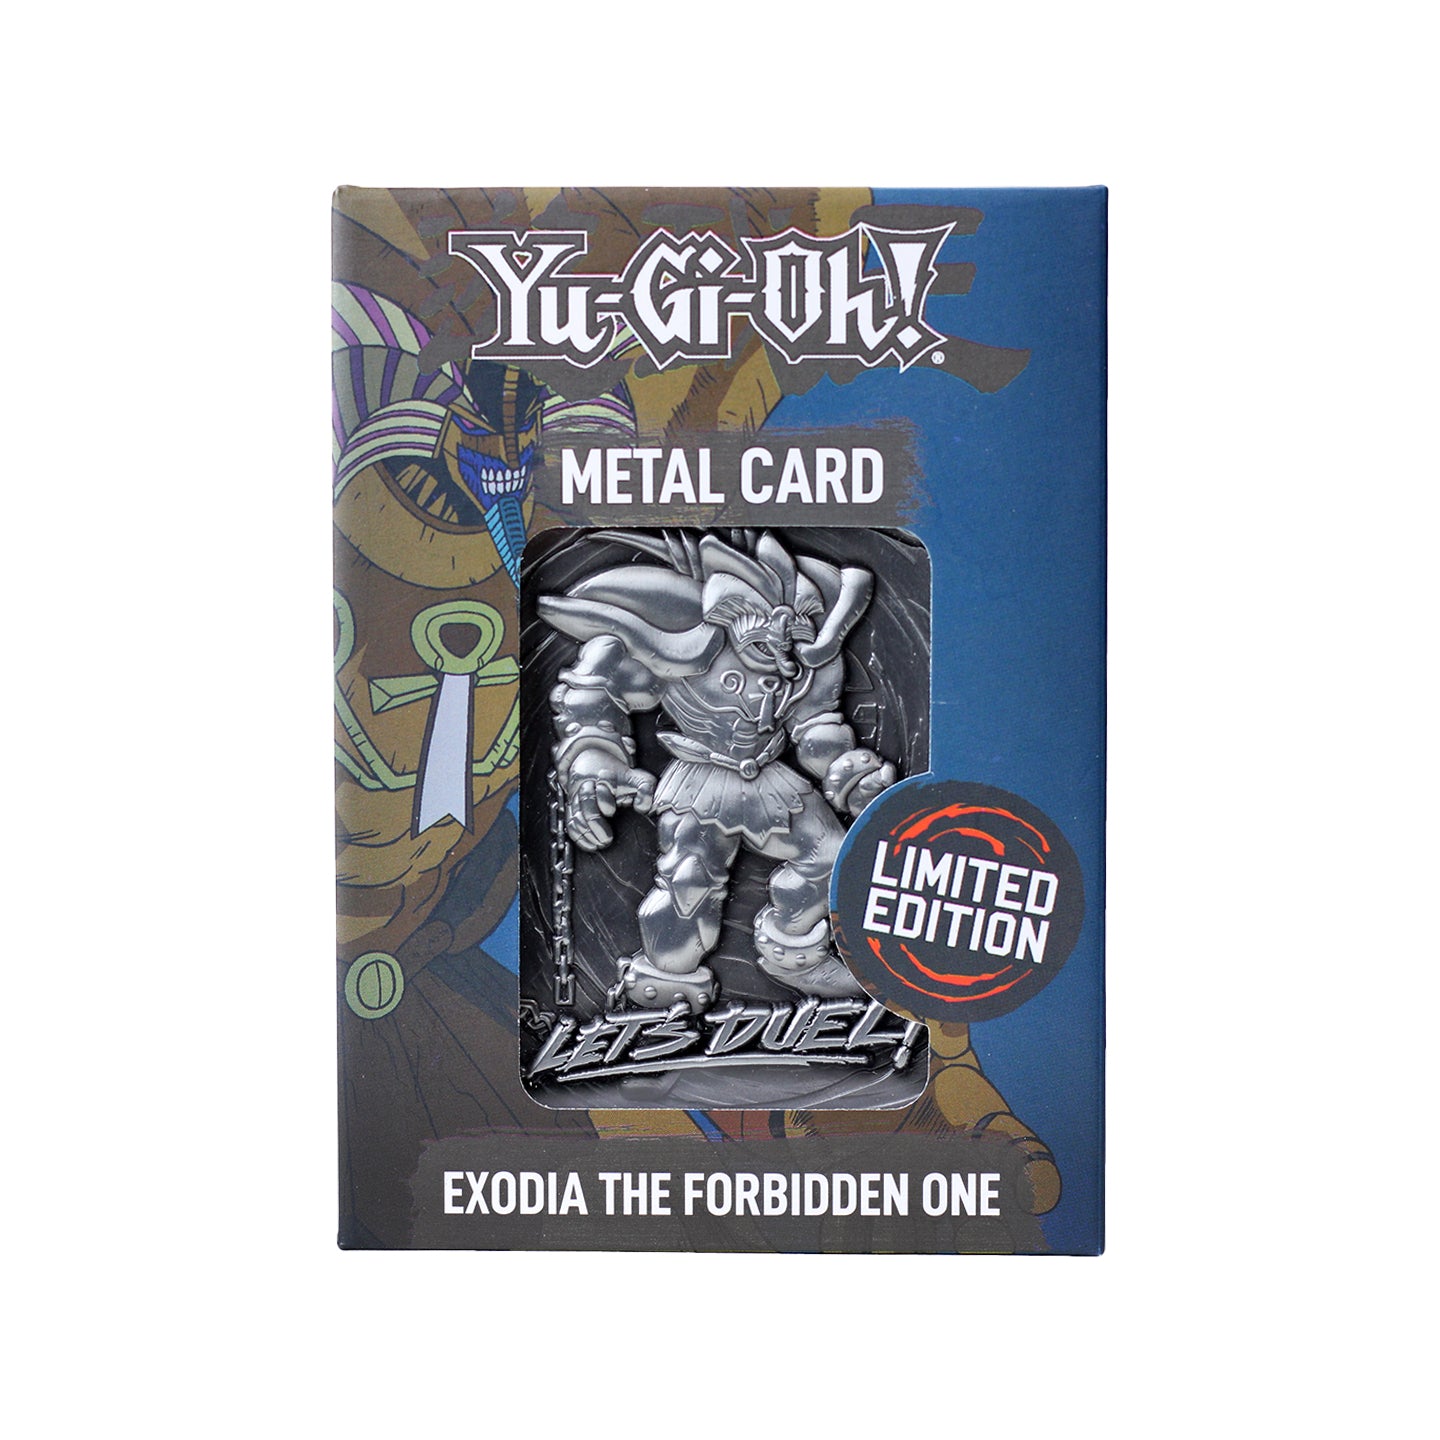 Yu-Gi-Oh! Limited Edition Exodia the Forbidden One Metal Card